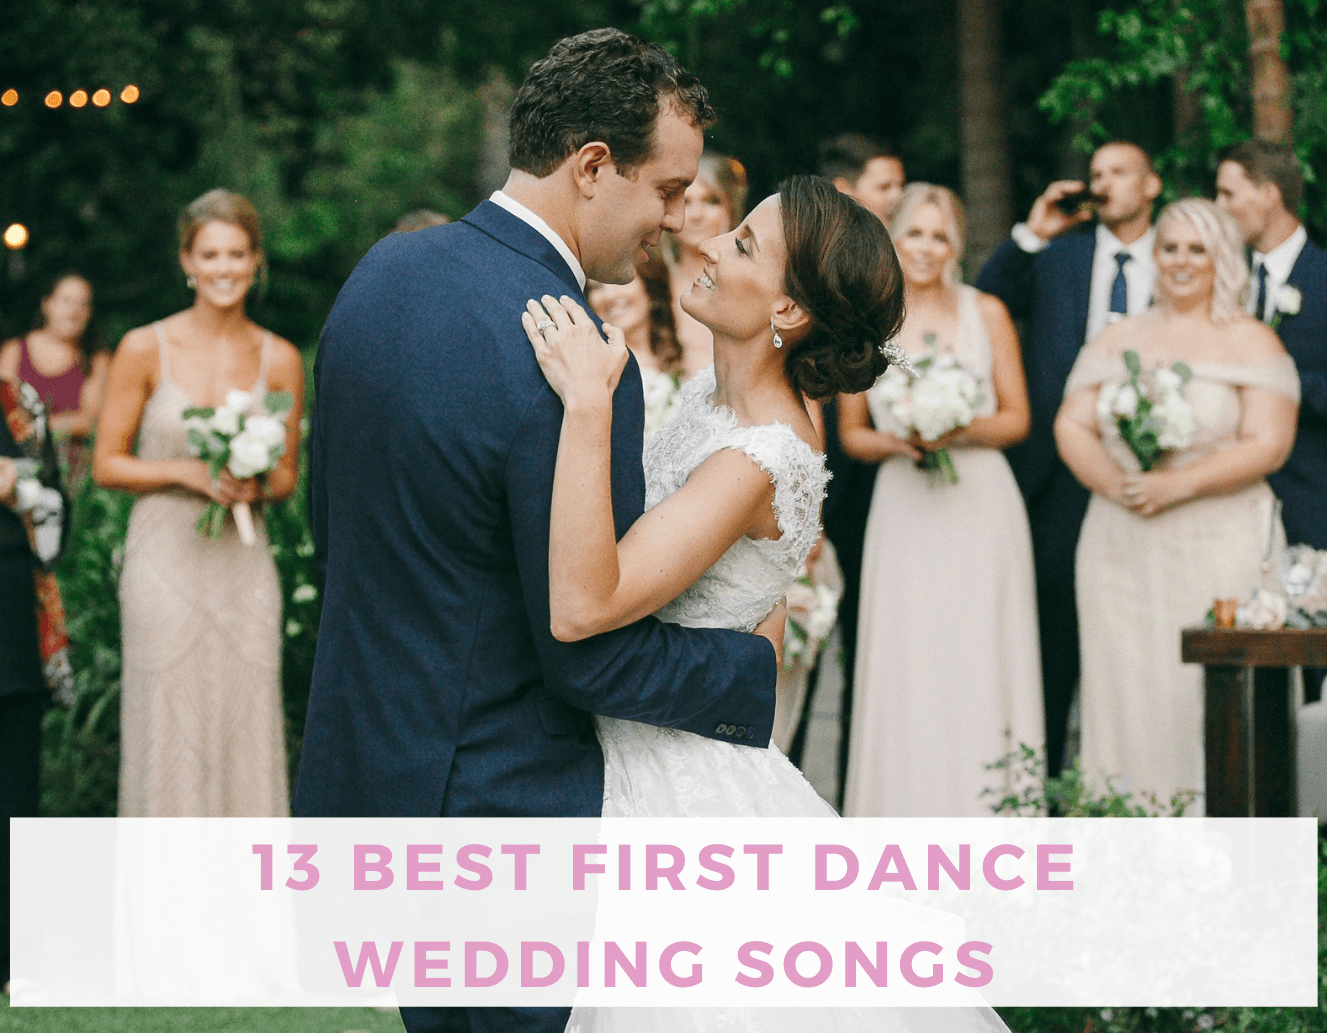 Perfect First Dance Wedding Songs By Dan And Shay — Dancing Brides